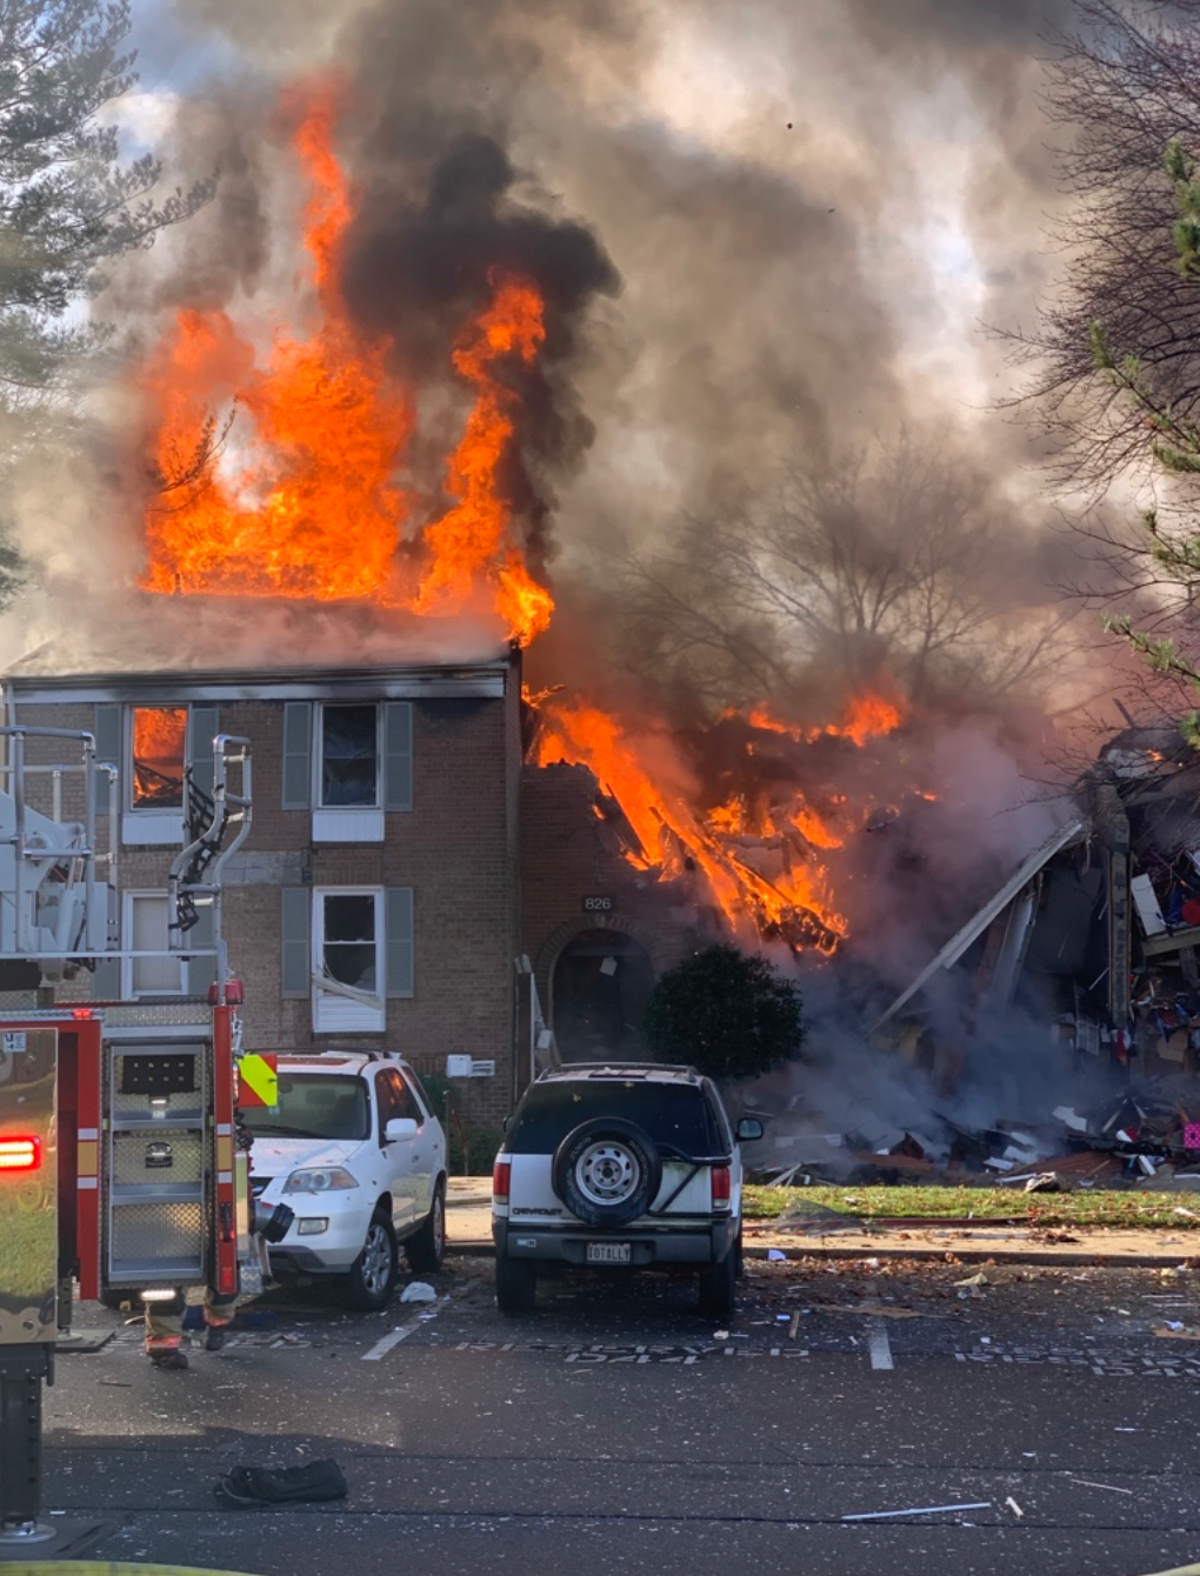 Maryland explosion: At least 10 people injured in apartment blast